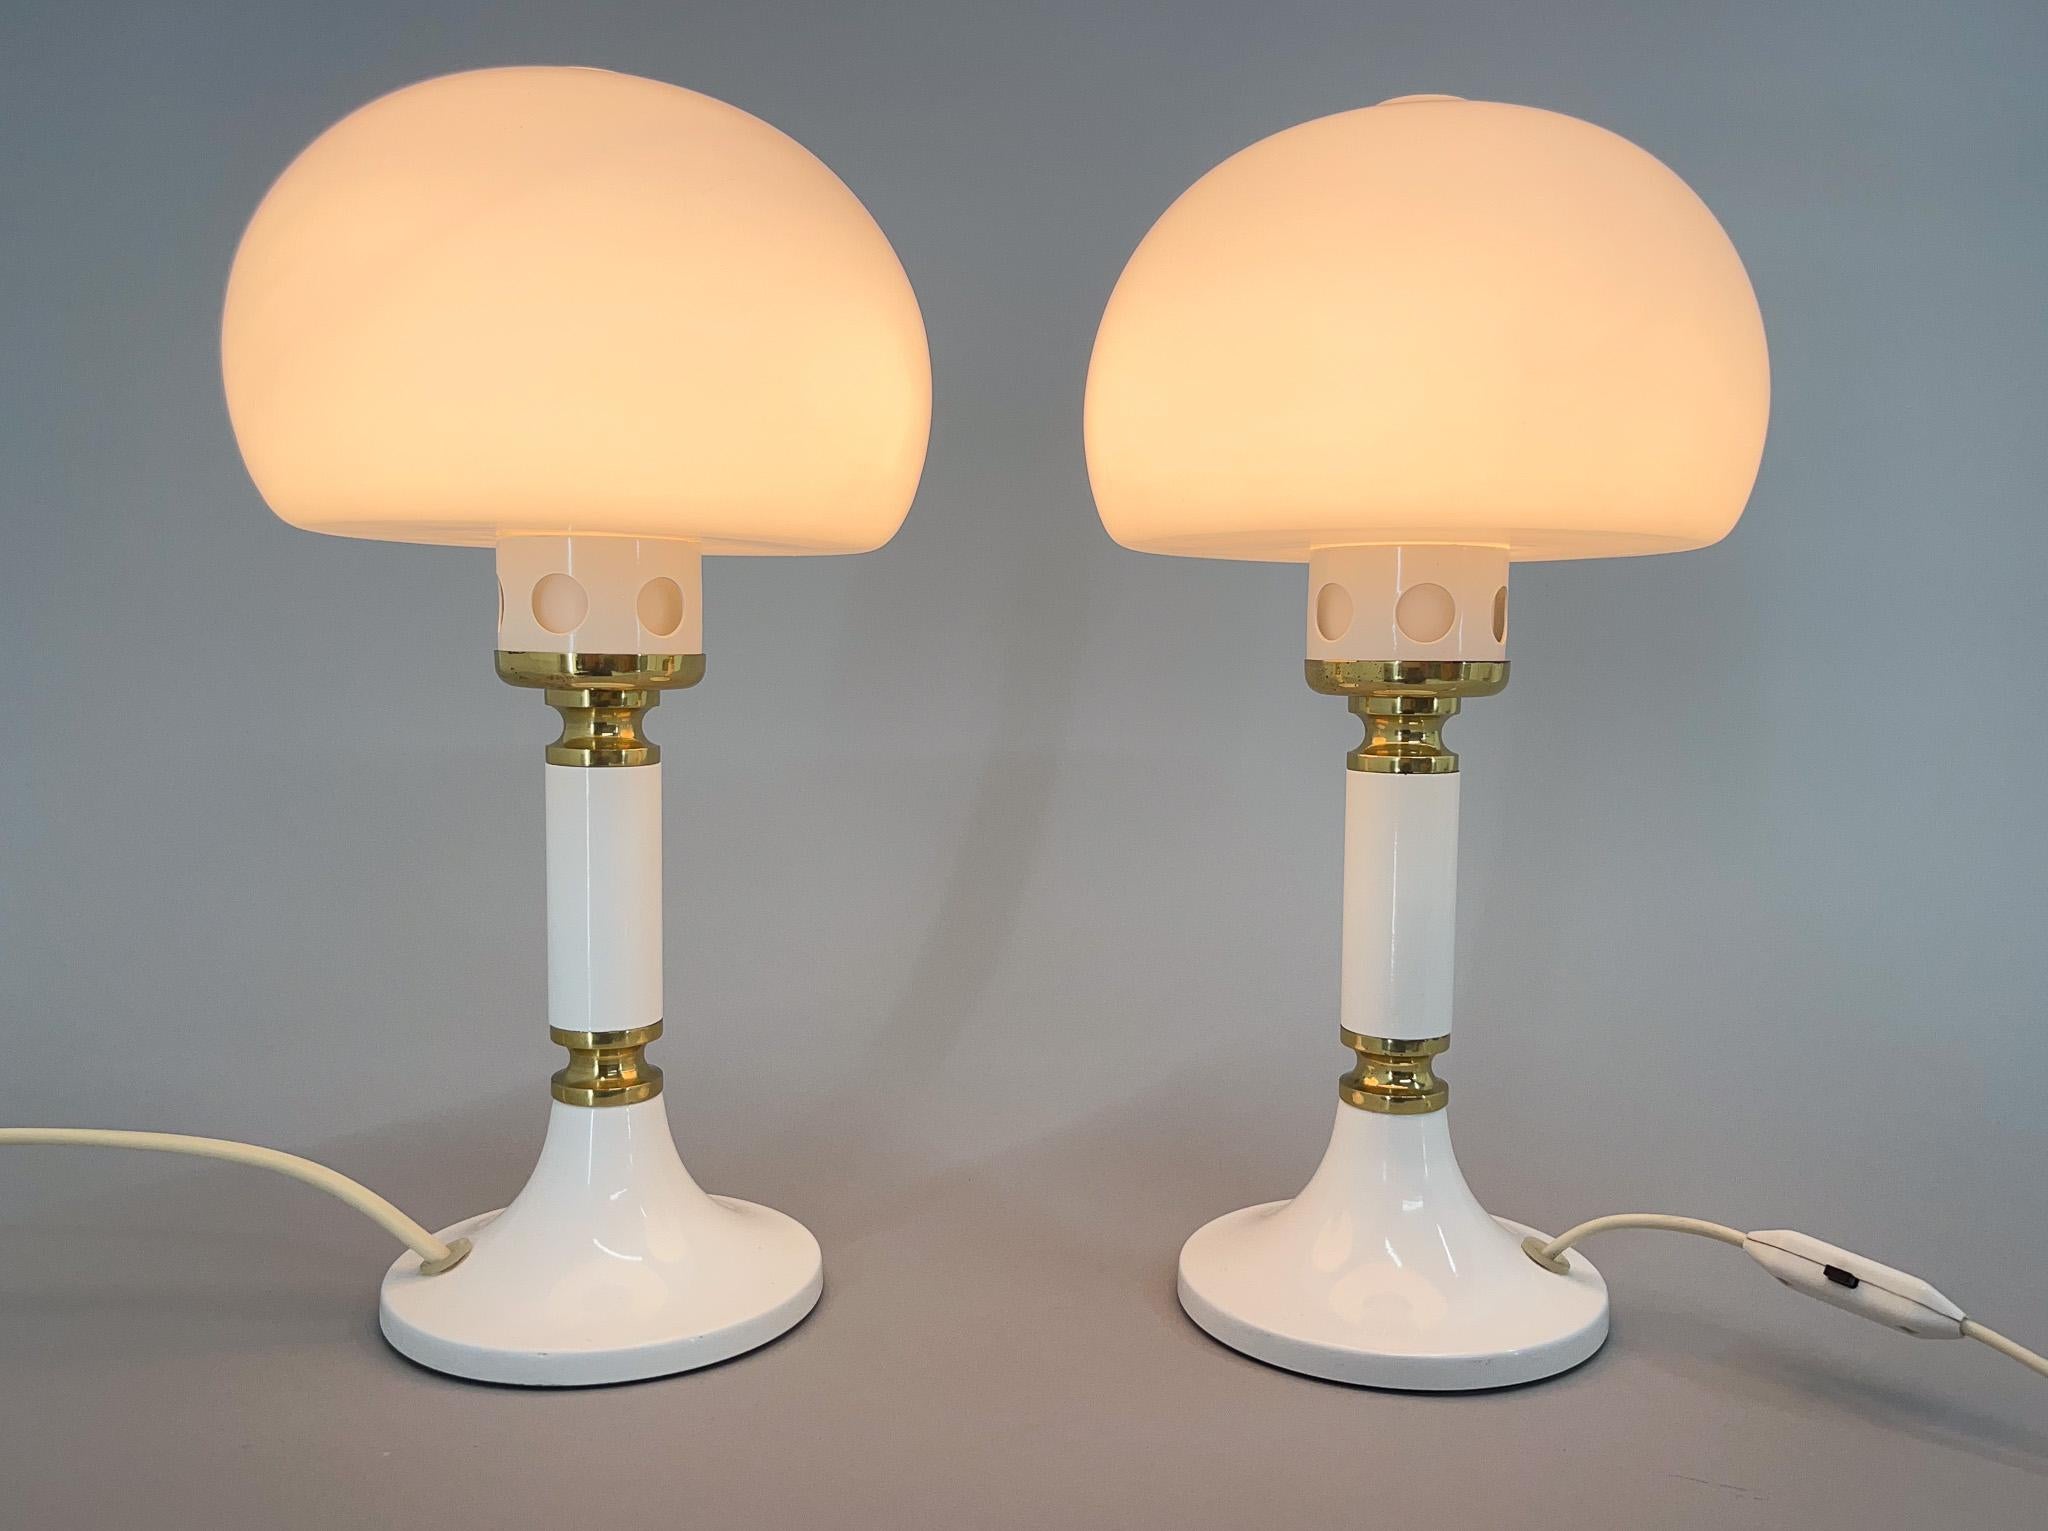 Set of two vintage table lamps made of metal, brass and opaline glass in former Czechoslovakia in the 1970's. Produced by Drukov, marked. Bulb: 2 x E14-E15.